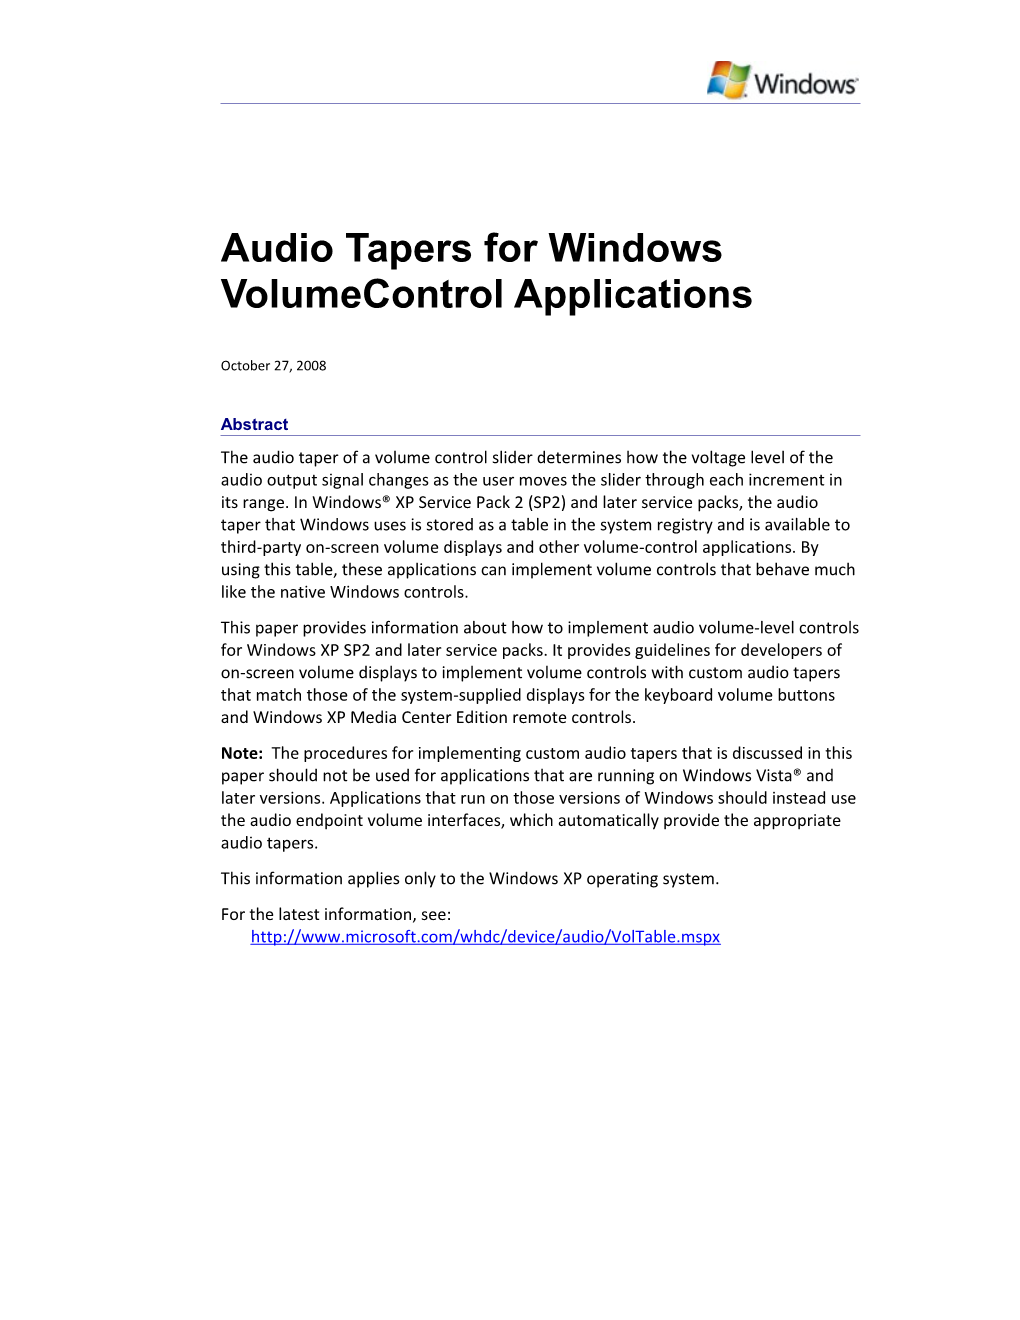 Audio Tapers for Windows Volume Control Applications